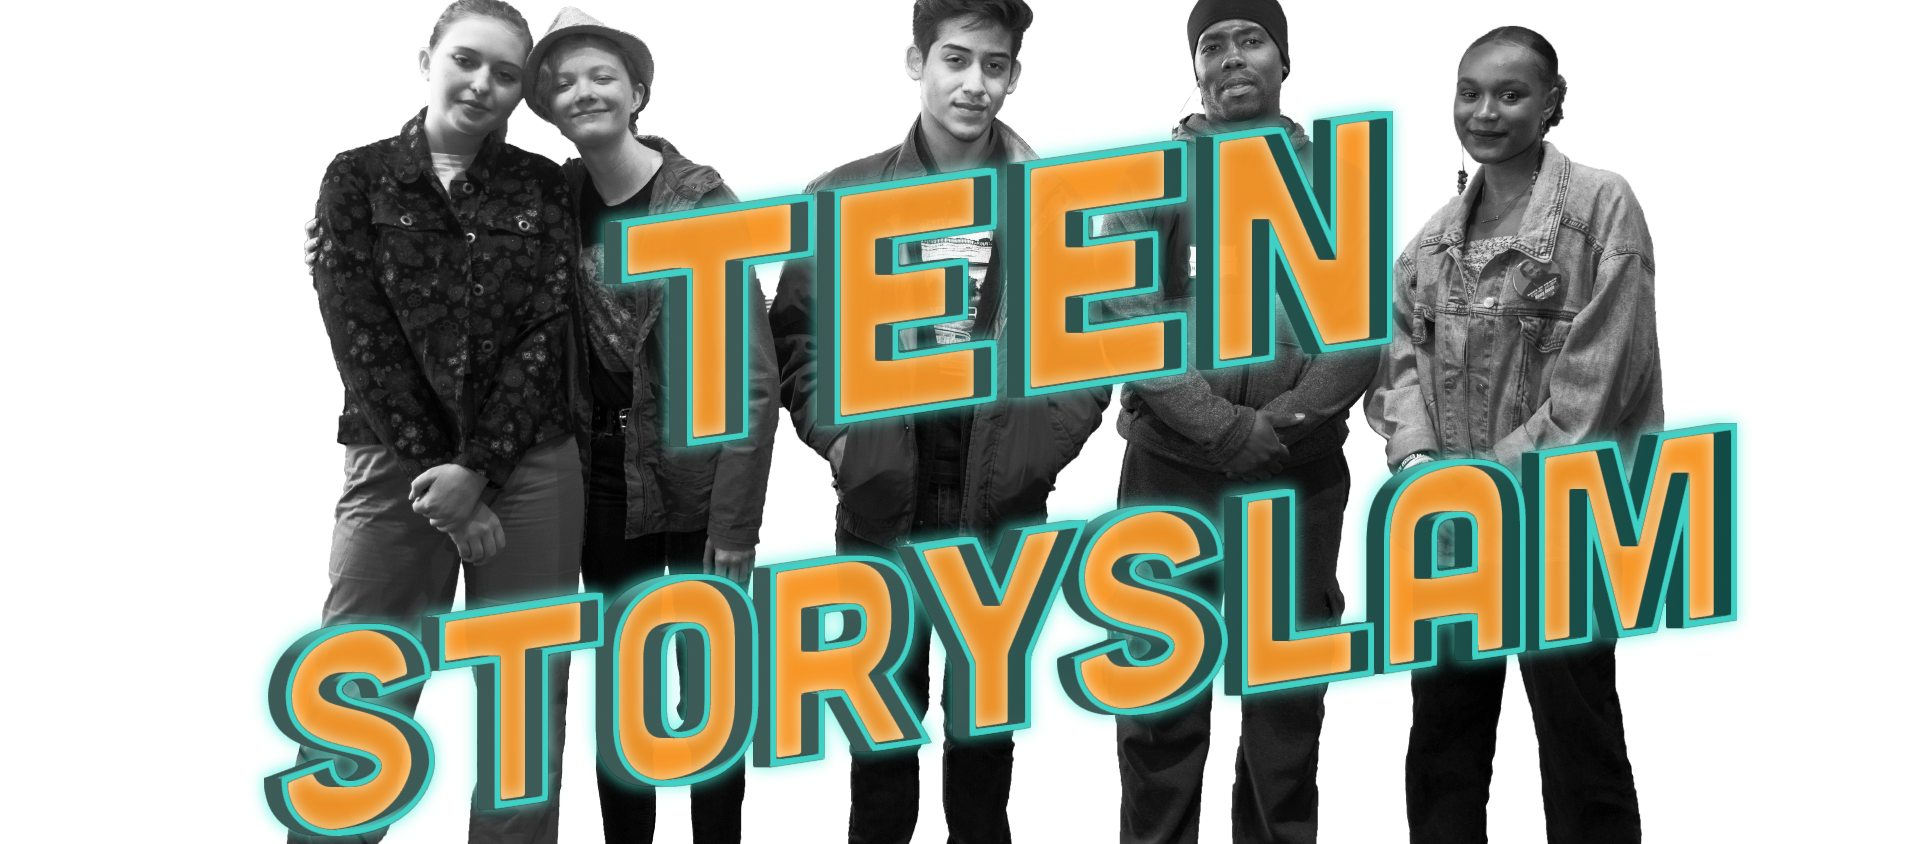 Teen Slam Logo Graphic. The teens are pictured in black and white. 'Teen StorySlam' text is yellow outlined with teal.